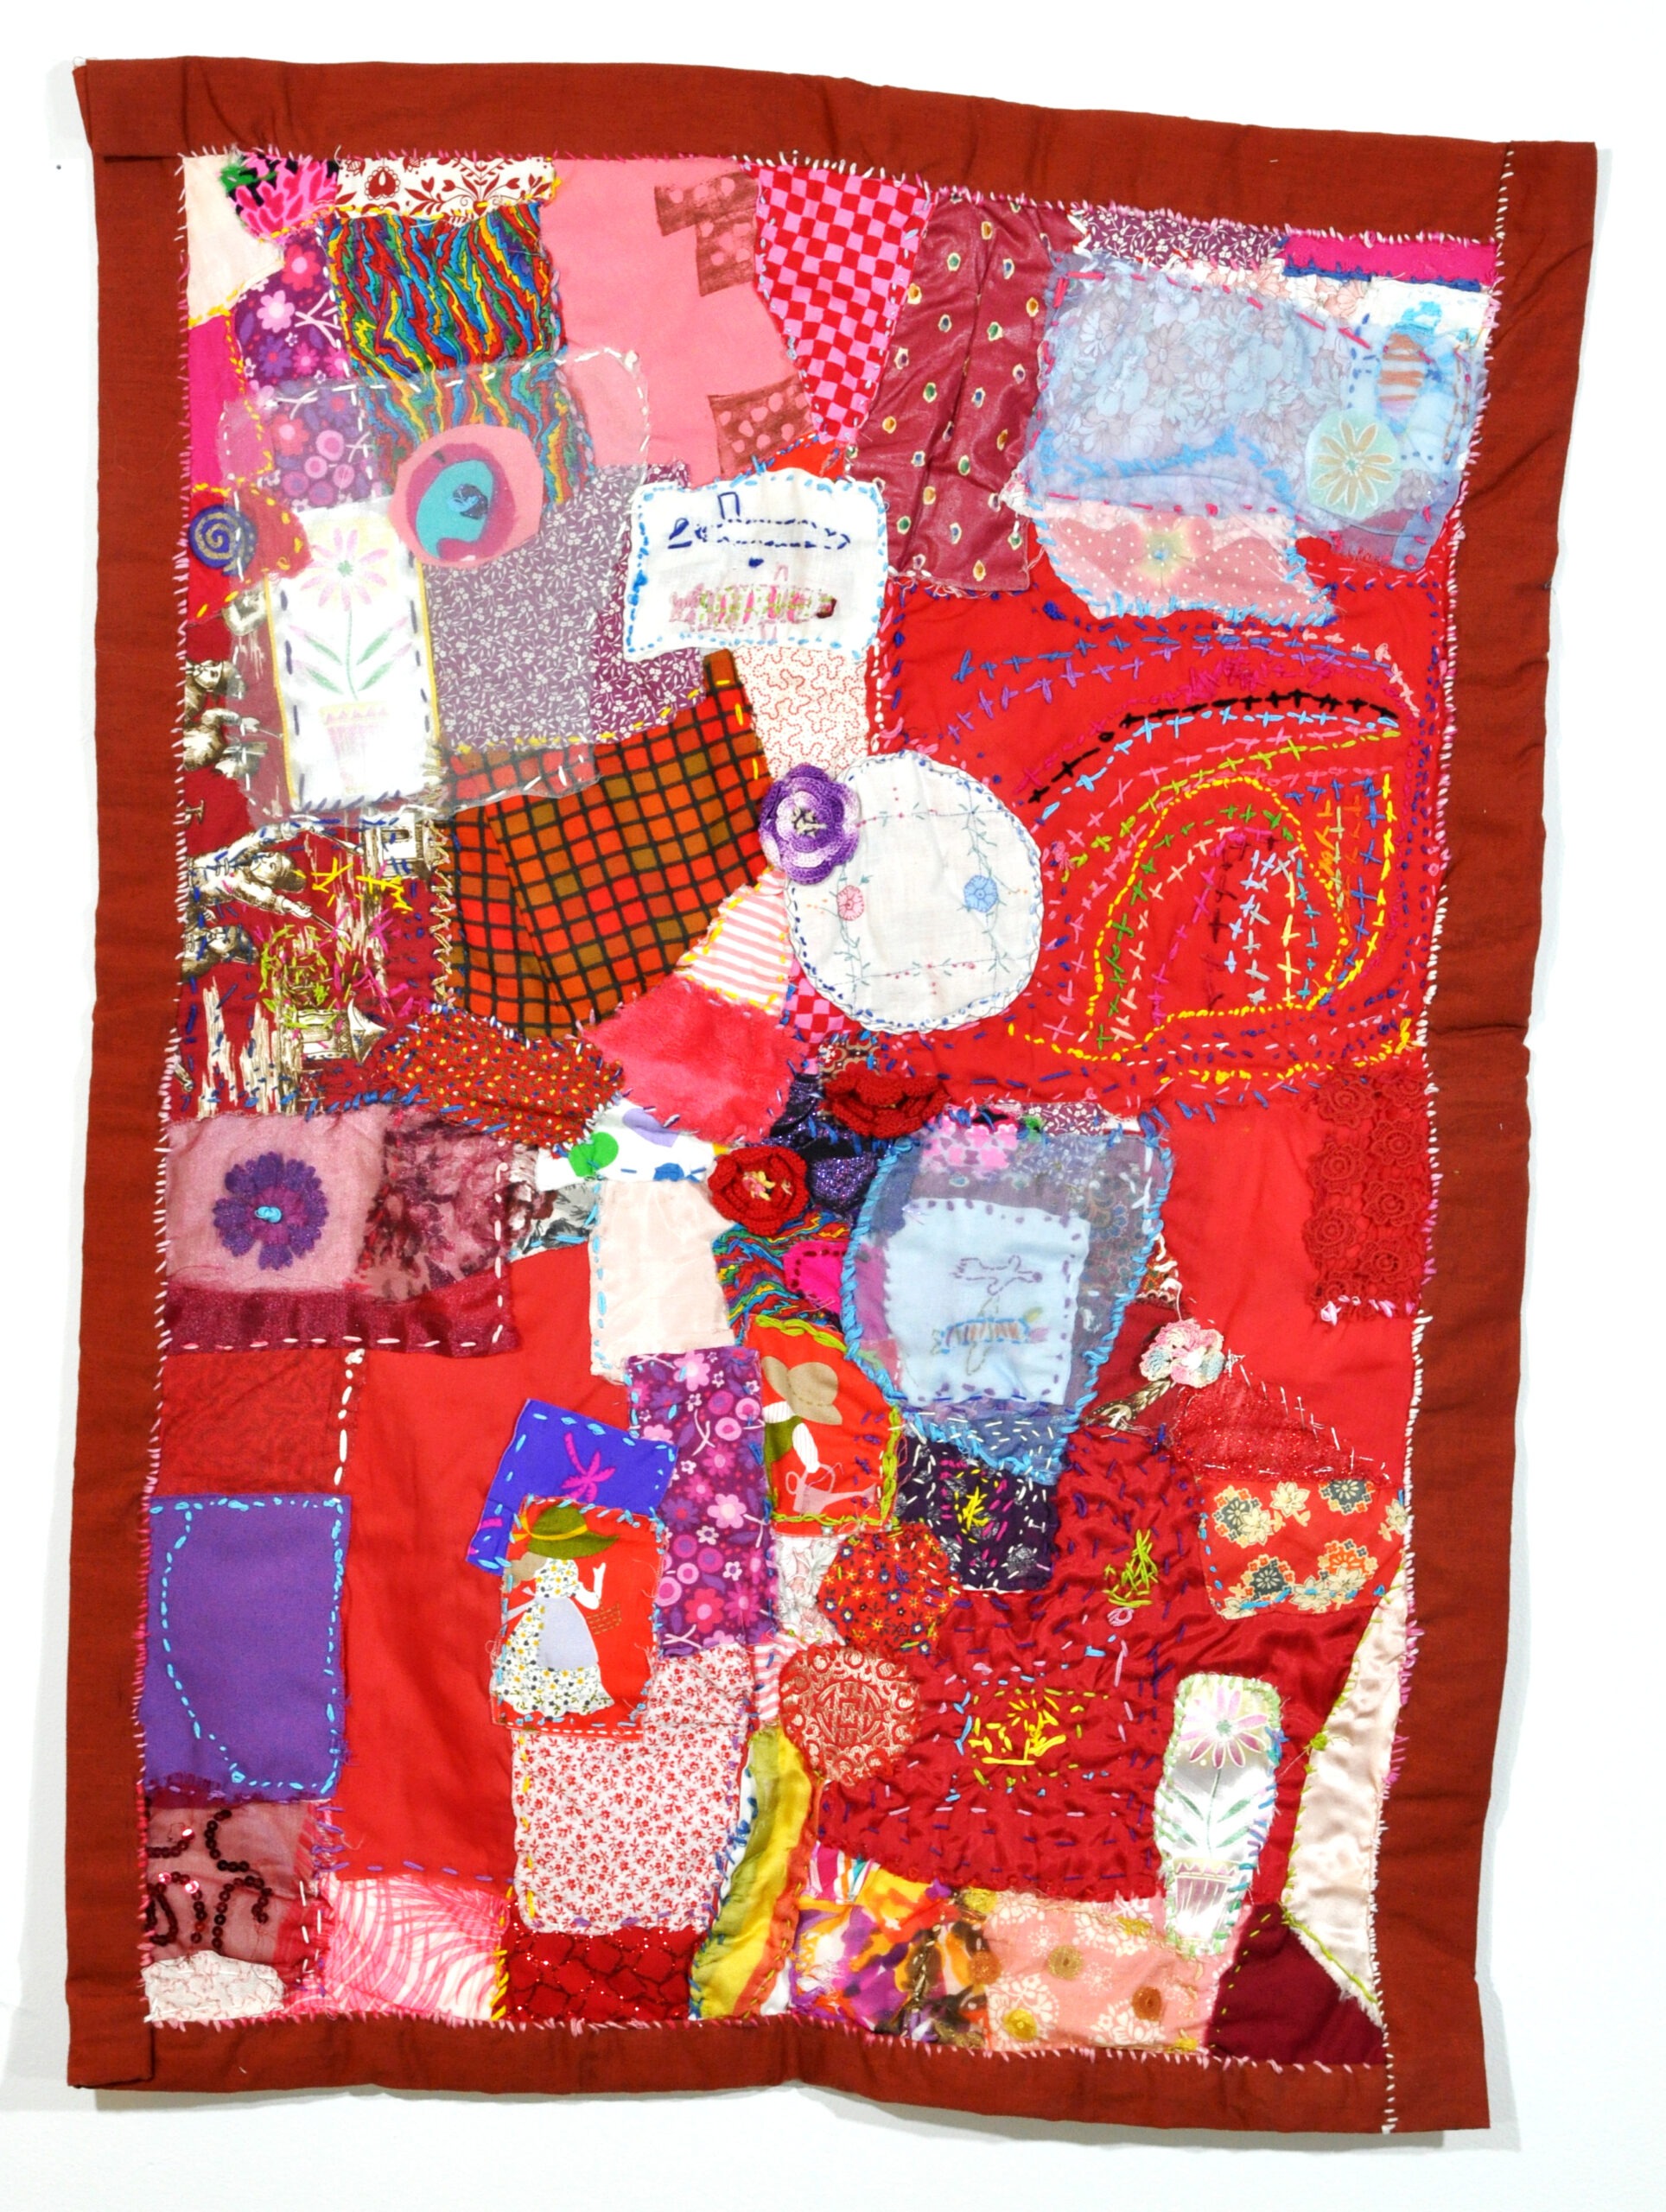 a brightly colored quilt, predominantly red